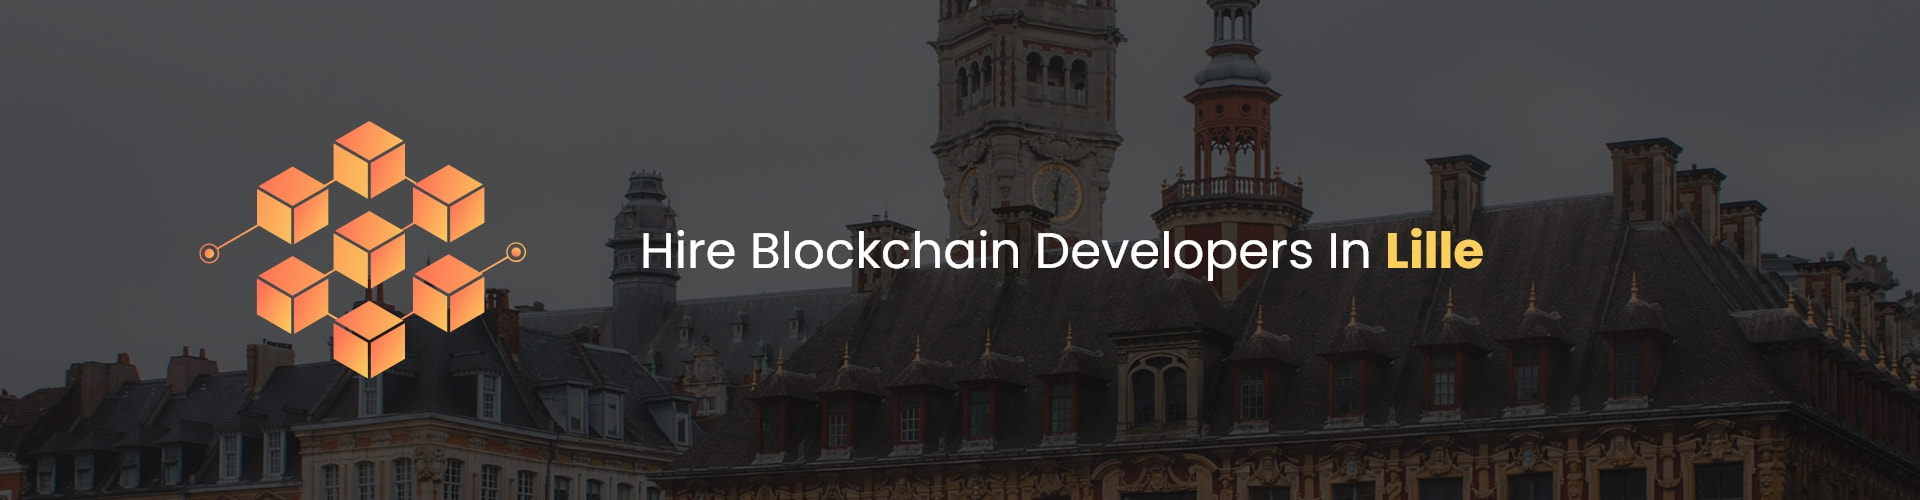 hire blockchain developers in lille